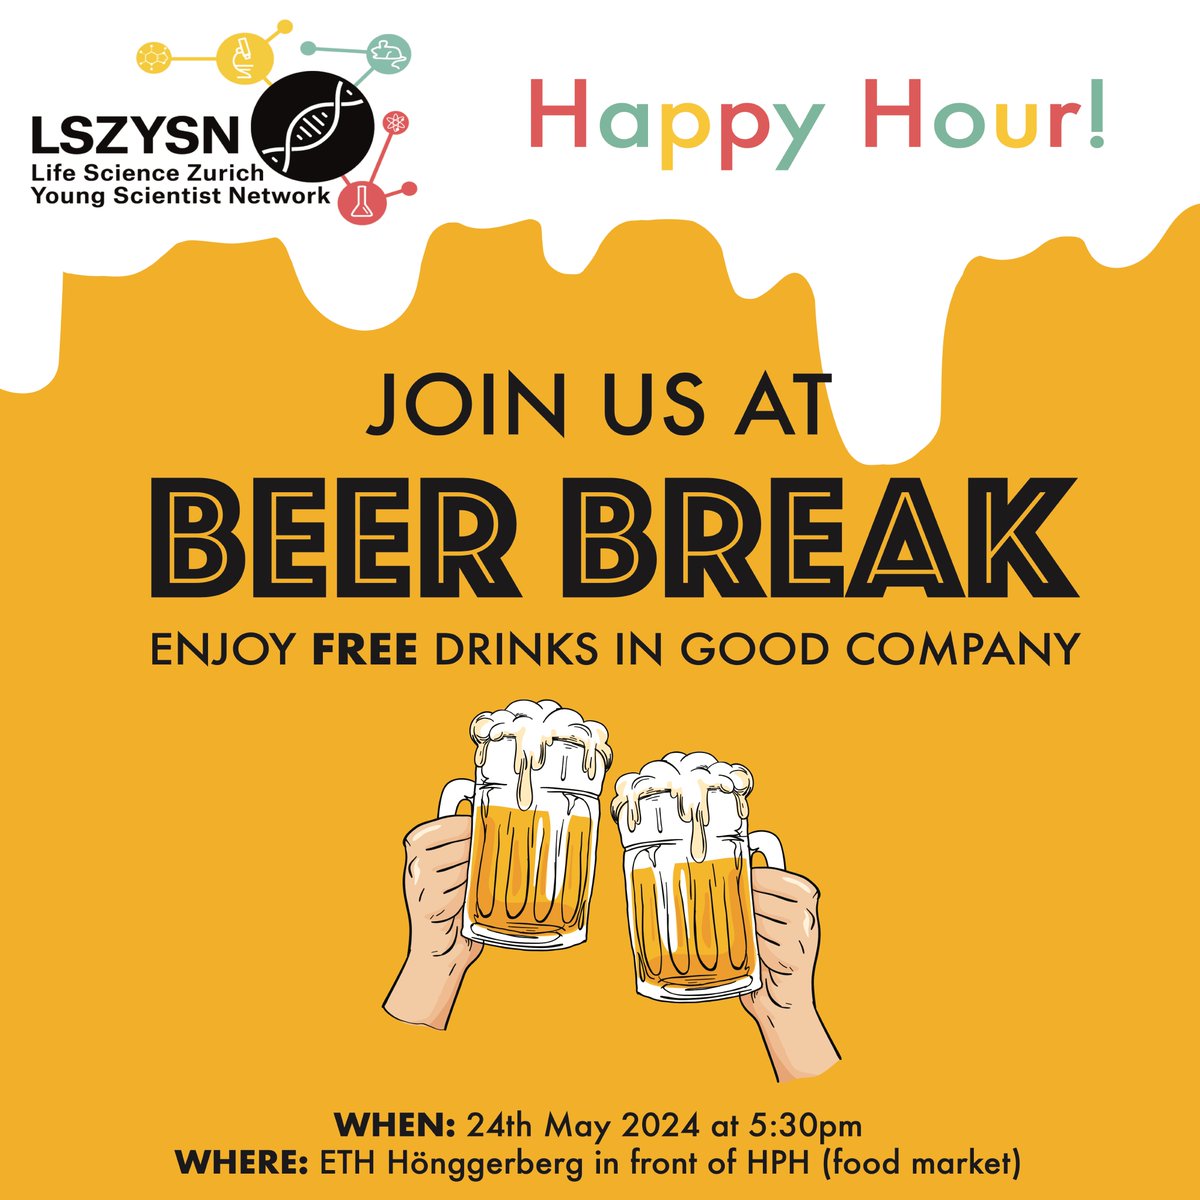 #BeerBreak #NetworkingEvent

What is the best way to end a very intense week? Drinking a free beer in good company!

Join us on the 24th of May from 5.30pm at ETH Hönggerberg. We are looking forward to seeing you!

#LSZYSN #UZH #ETH #ETHZurich